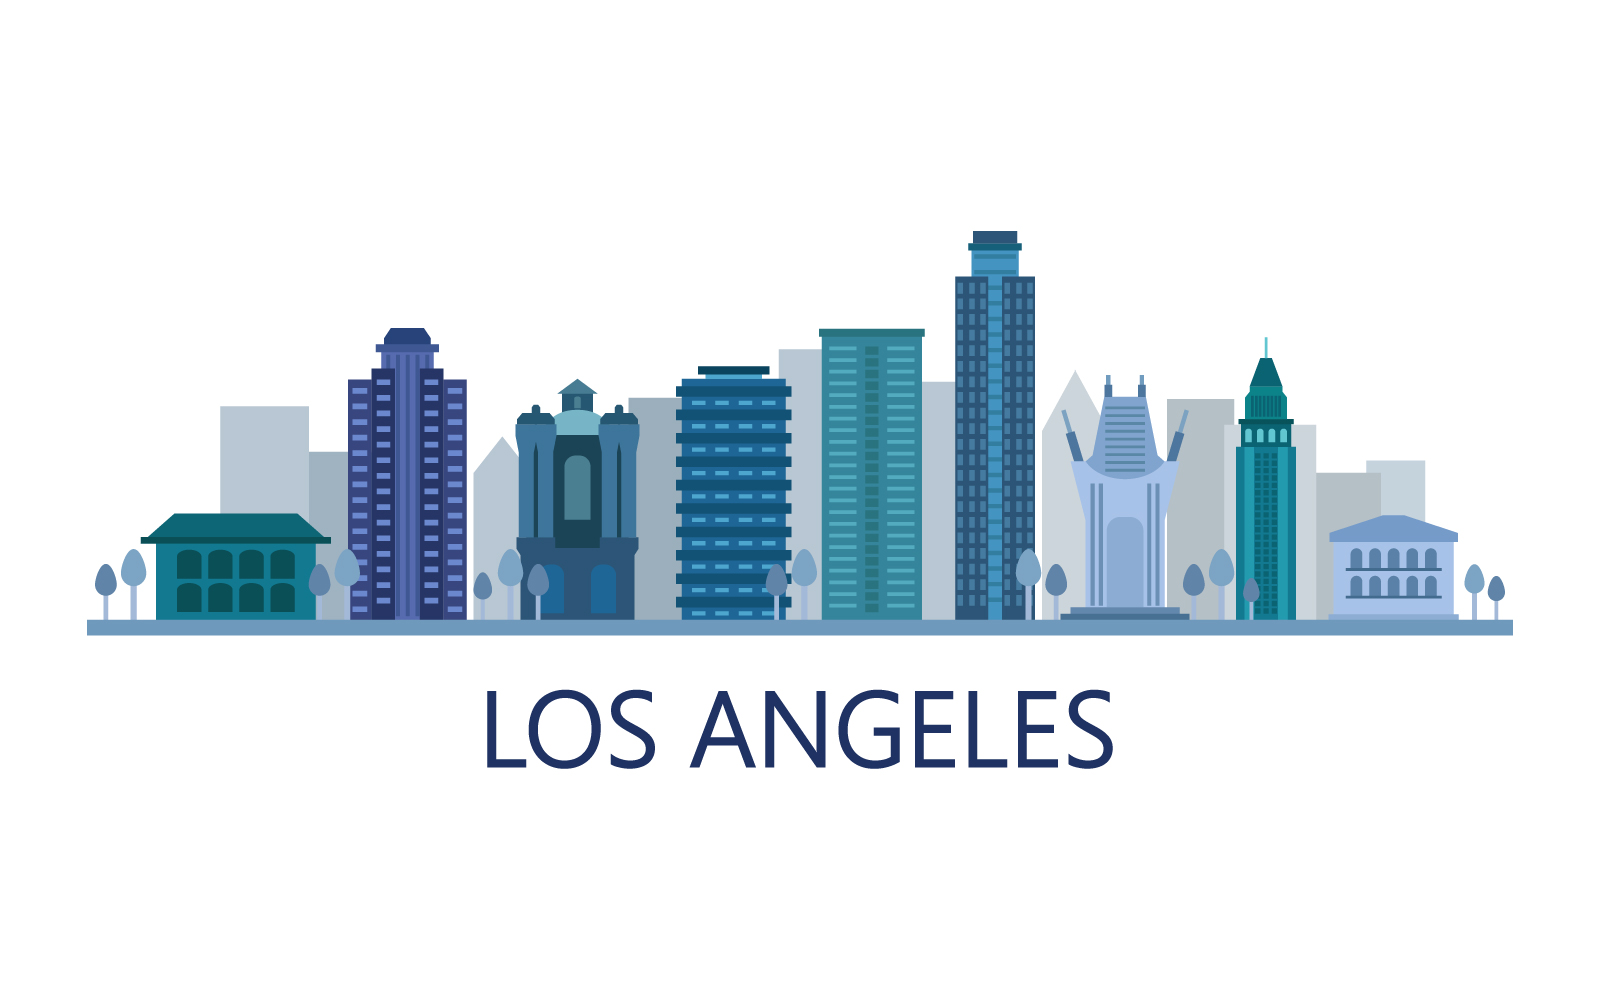 Los Angeles skyline illustrated in vector on a white background